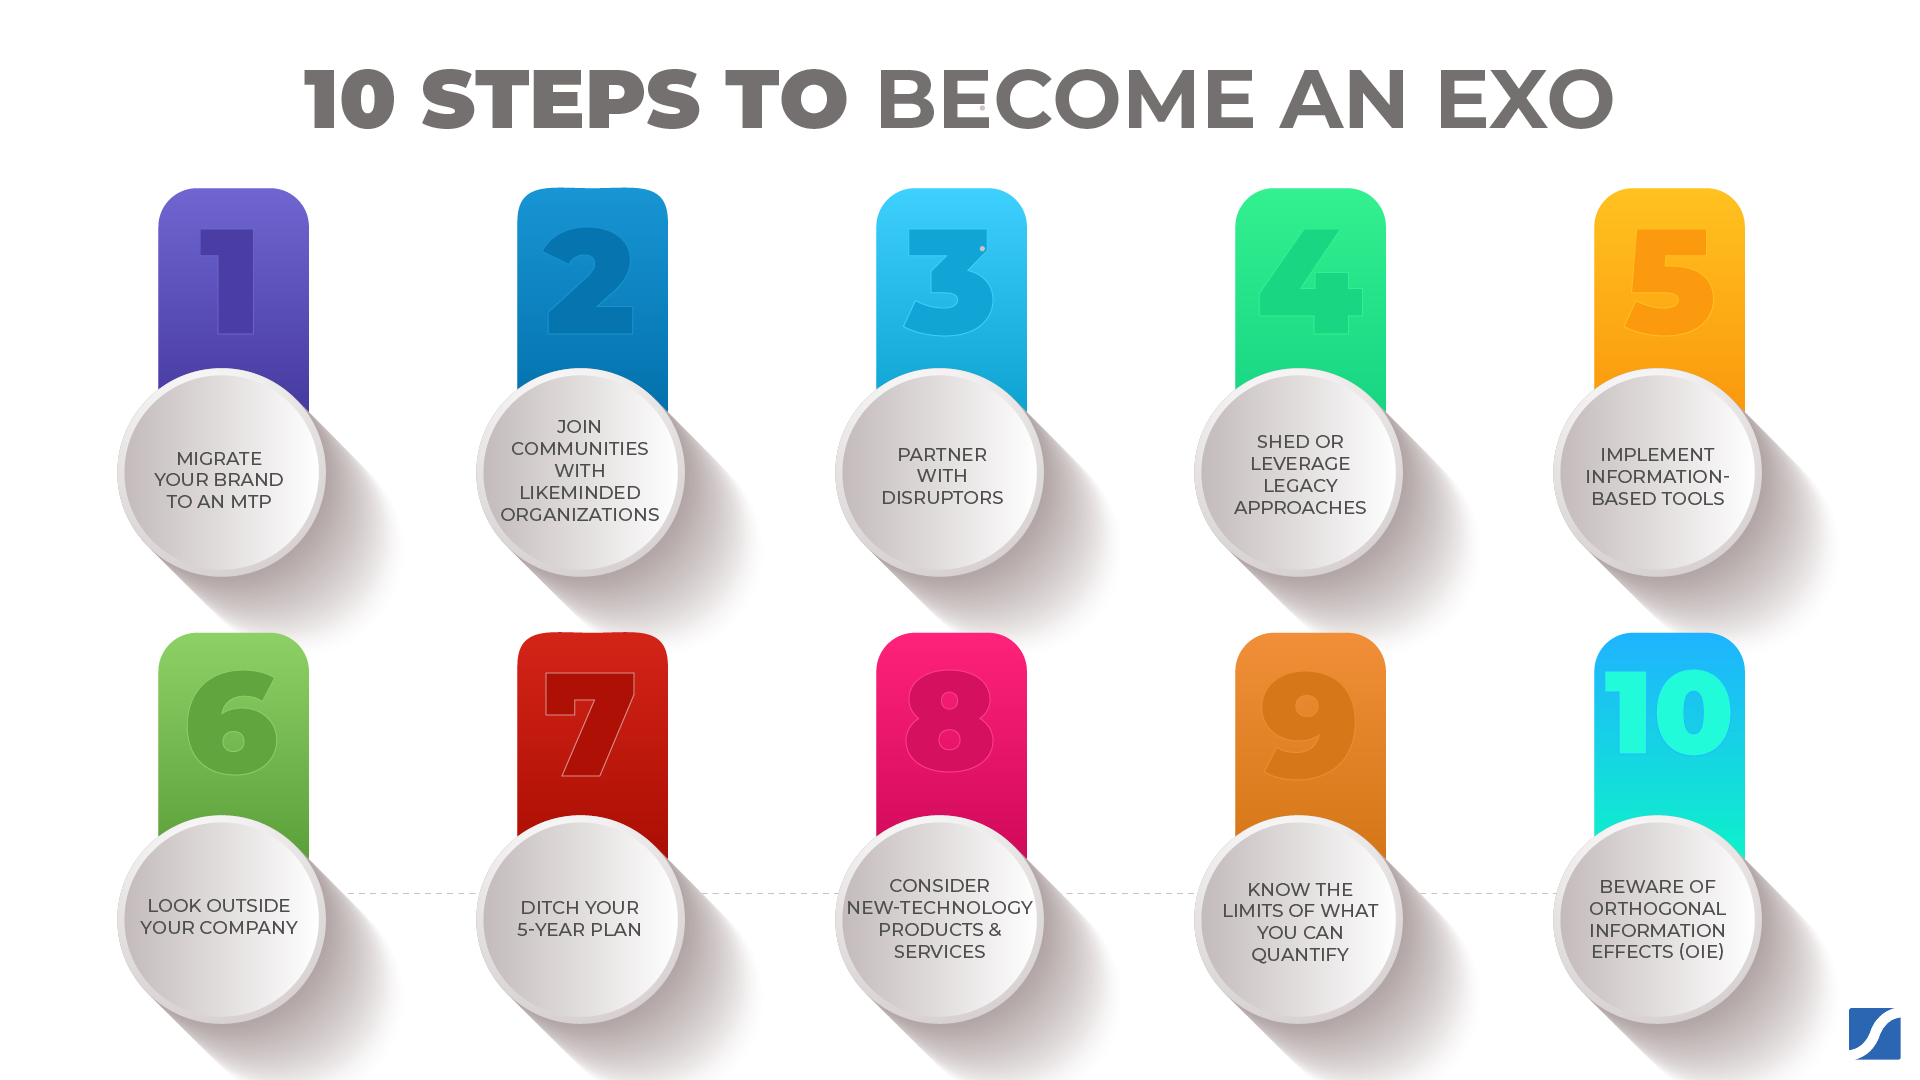 10 STEPS TO BECOME AN EXO infographic